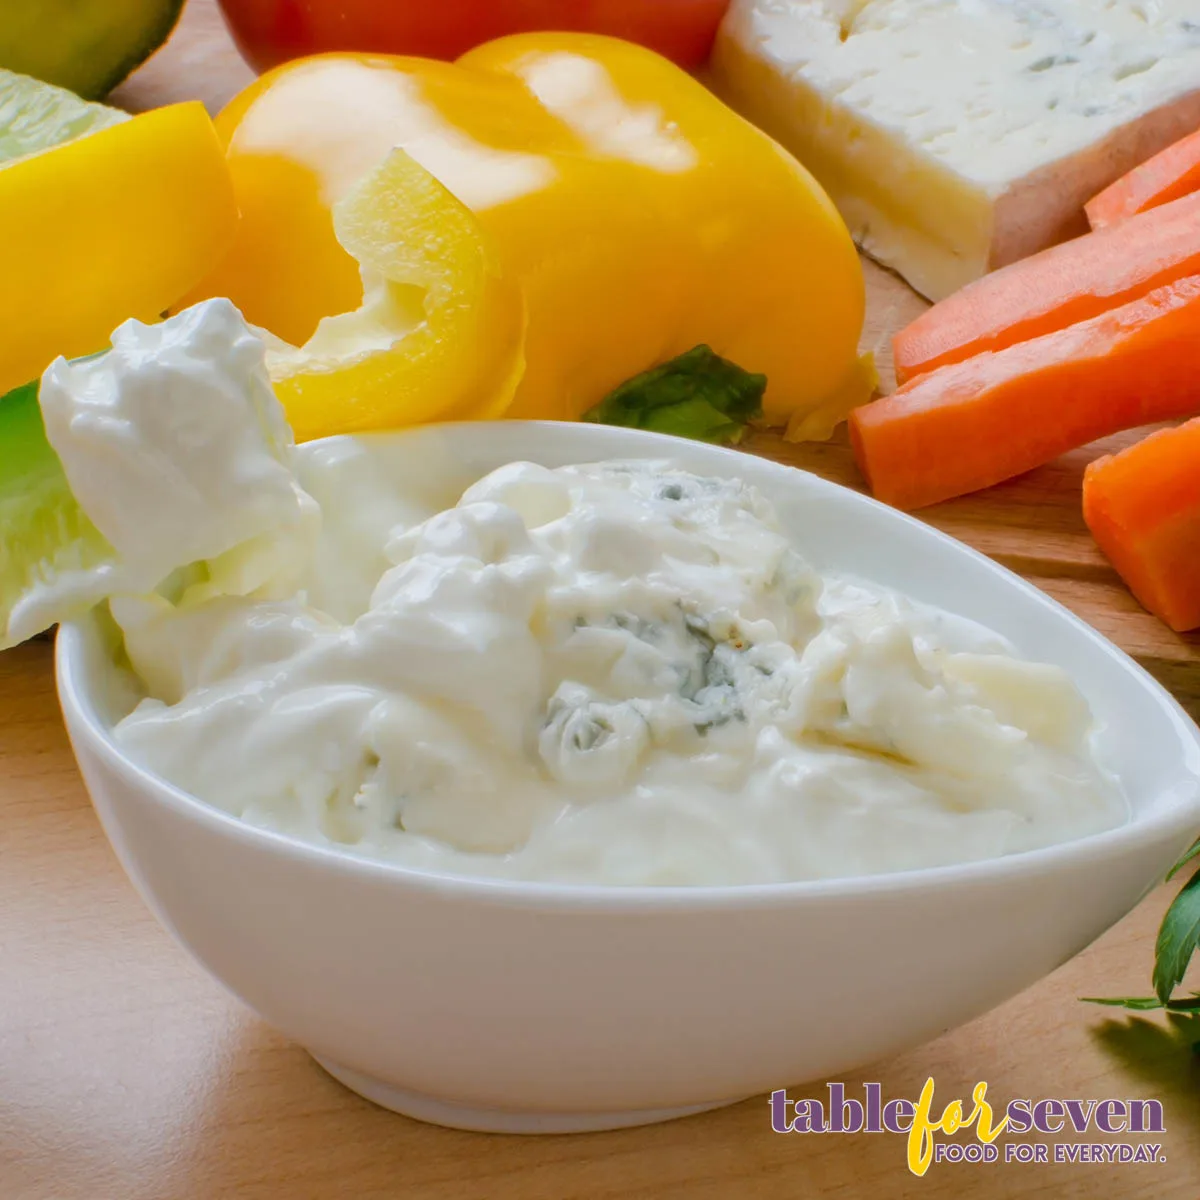 Blue cheese dressing with vegetables